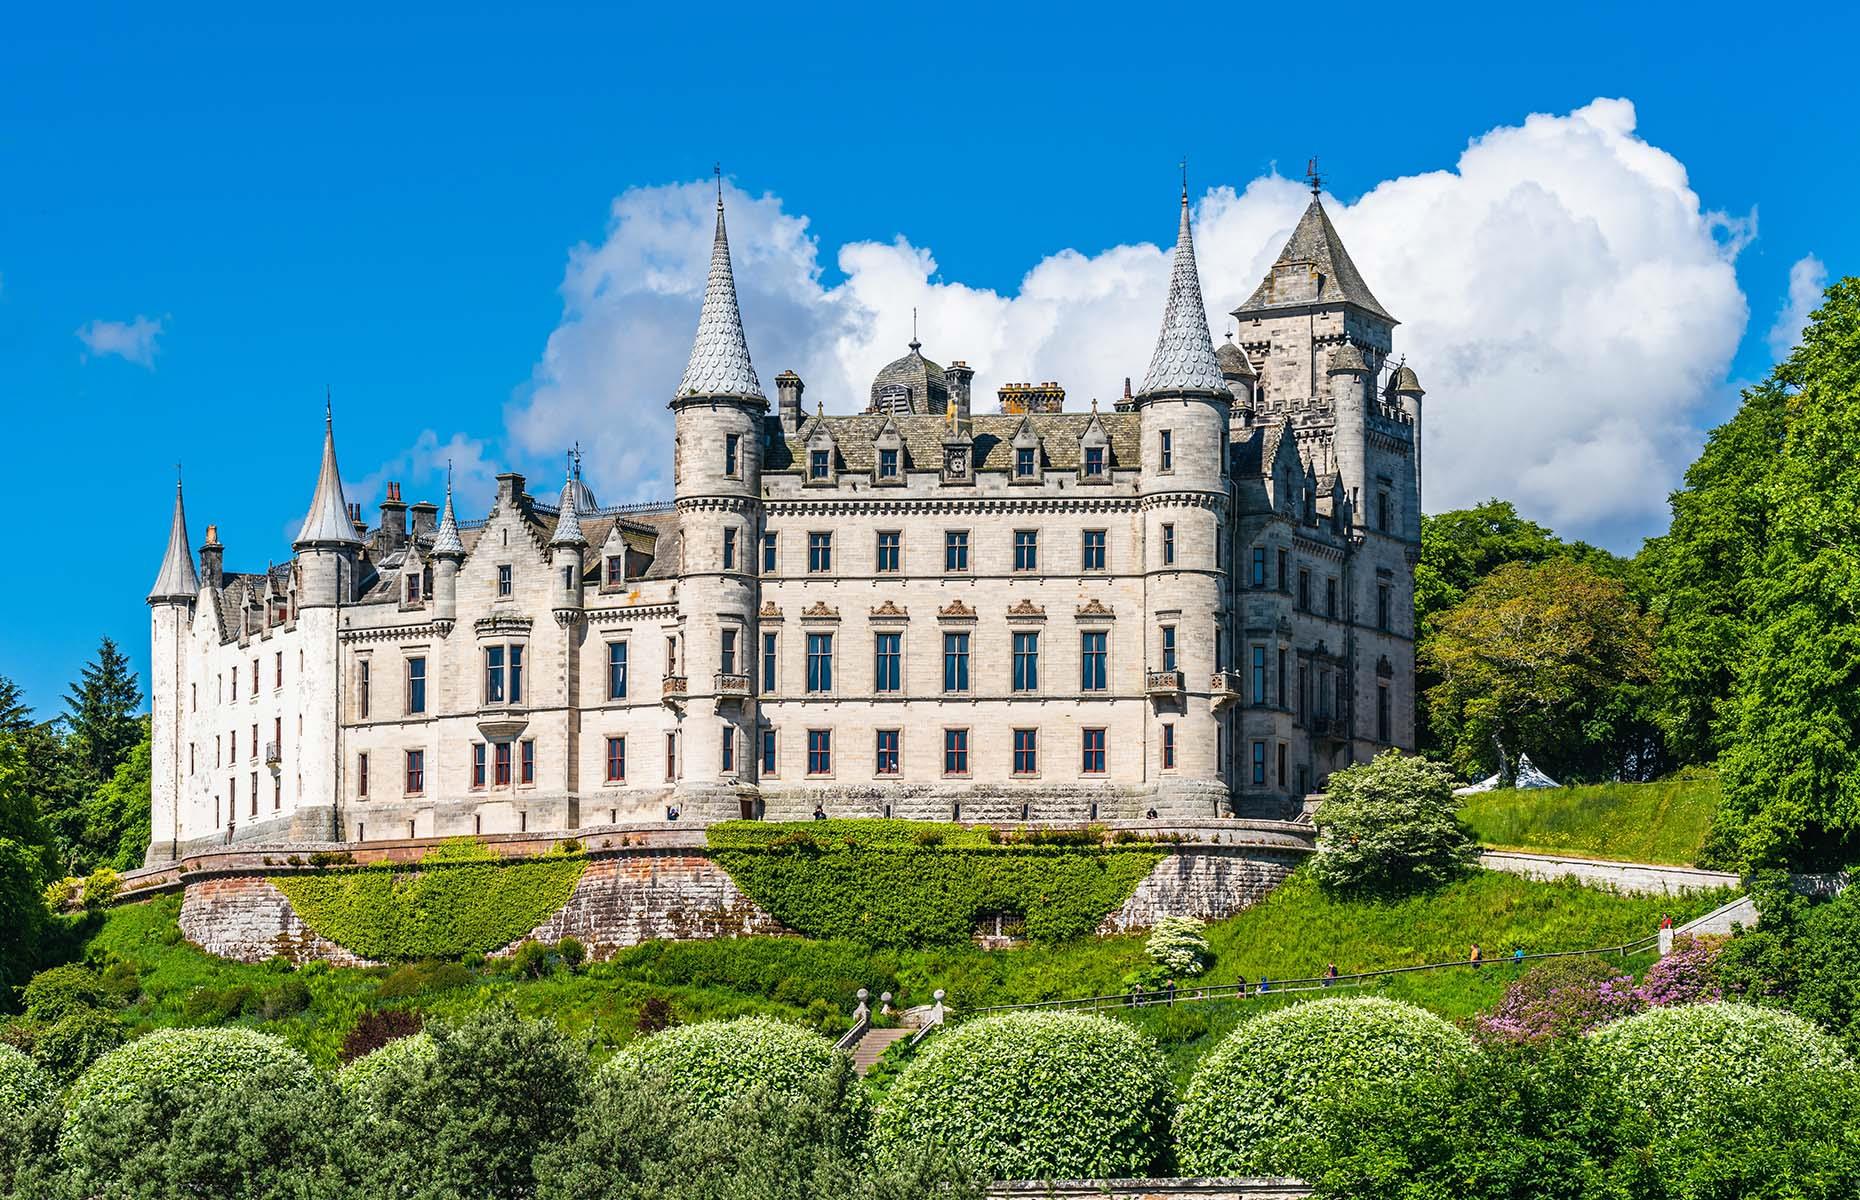 With its slender conical turrets that look borrowed from a French chateau and its impeccably manicured gardens, Dunrobin, Scotland’s most northerly 'big house', often stops visitors in their tracks as they head towards John O' Groats in Scotland's far north. However, while it may look like a fairy-tale castle, it hides a rather unsavoury past that, try as it might, it's been unable to shake off.